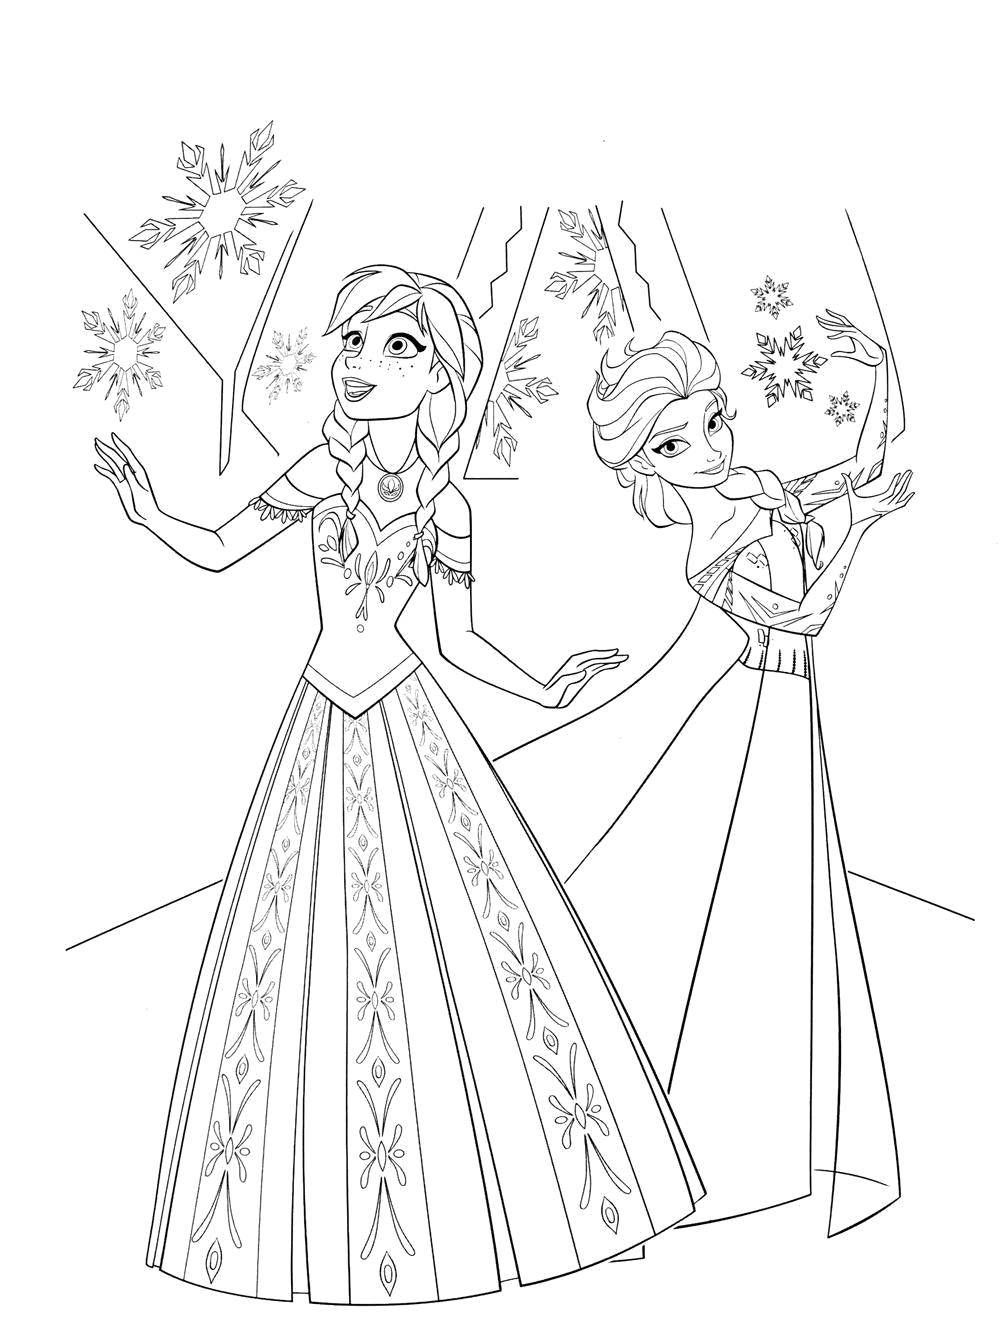 Coloring cold heart. Category coloring cold heart. Tags:  Disney, Elsa, frozen, Princess.